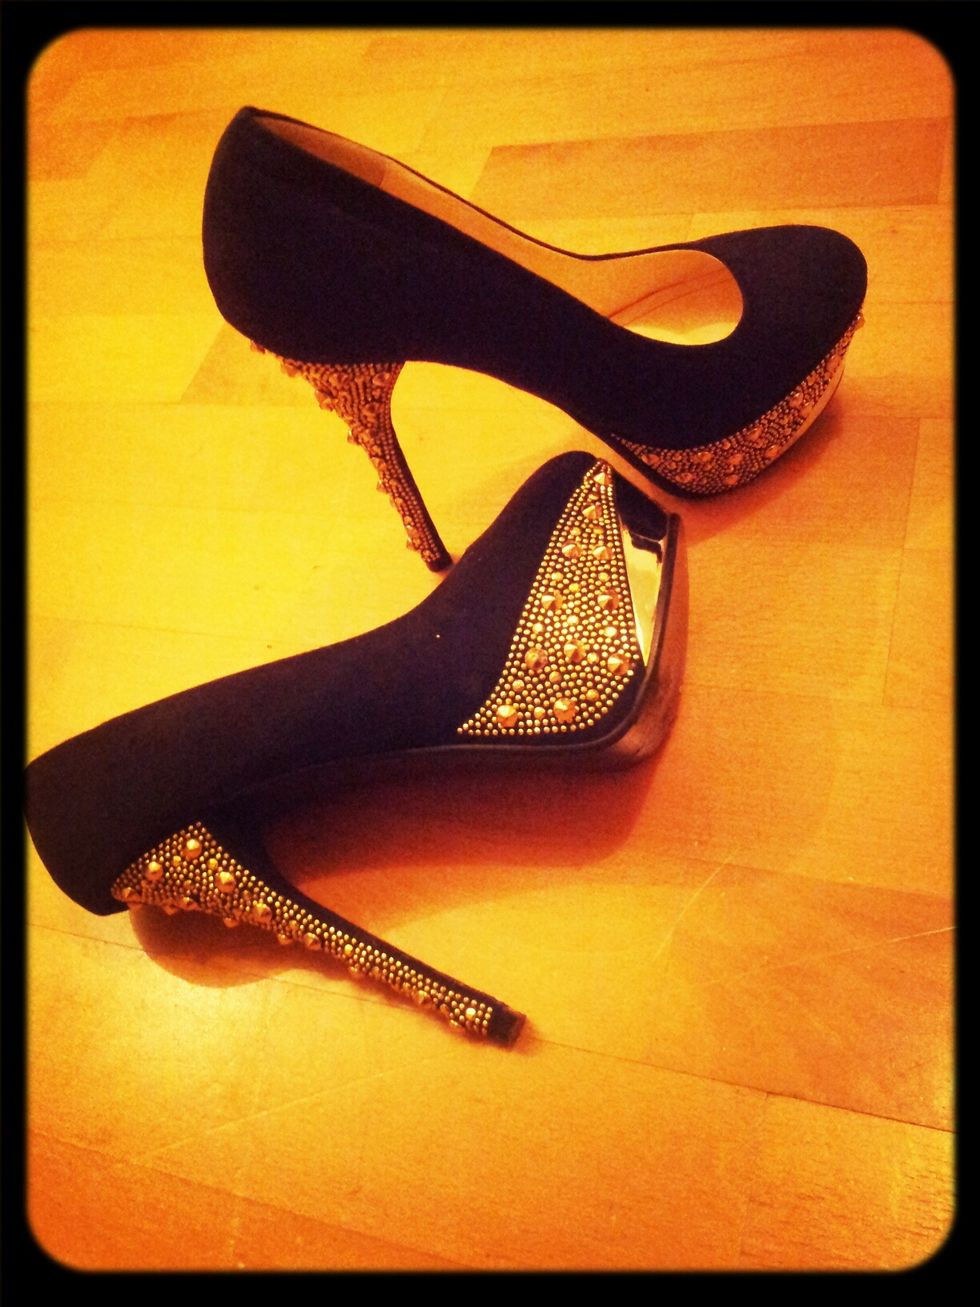 black shoes against a wood floor with the high heels and side of the shoes in gold jewels